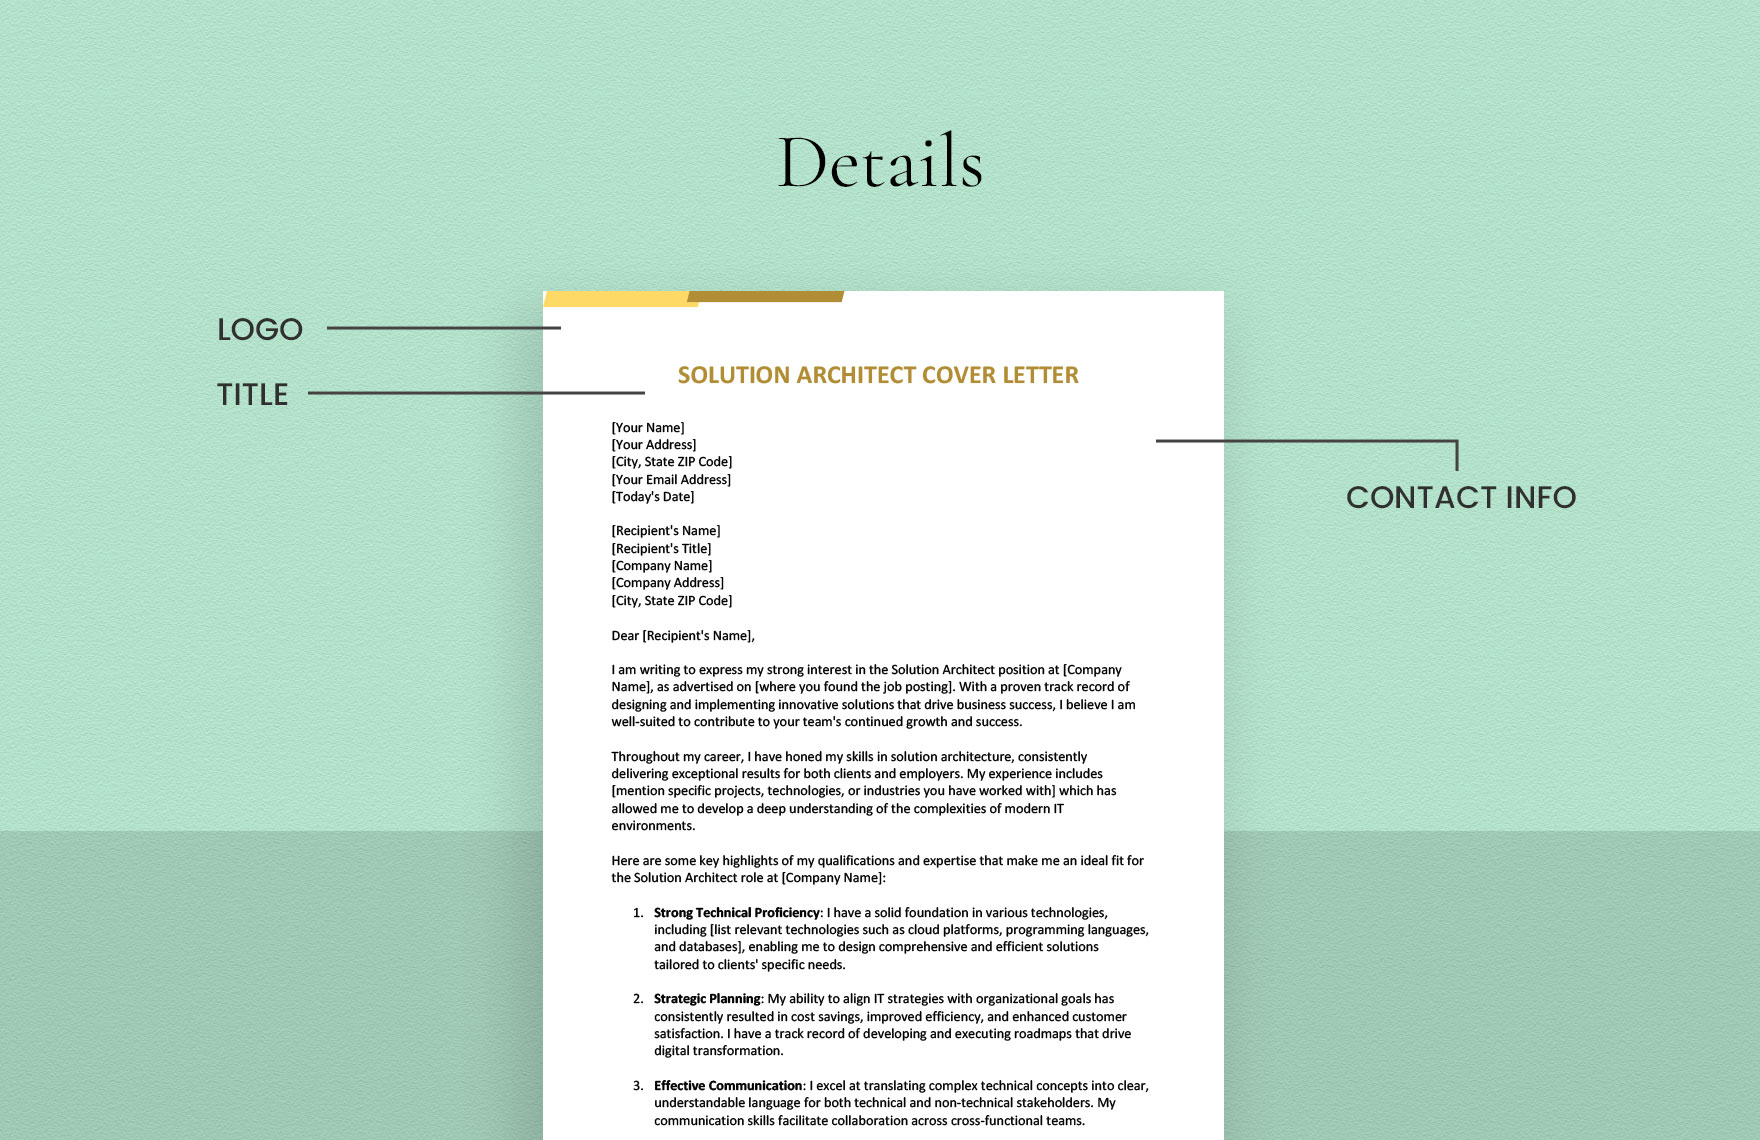 Solution Architect Cover Letter